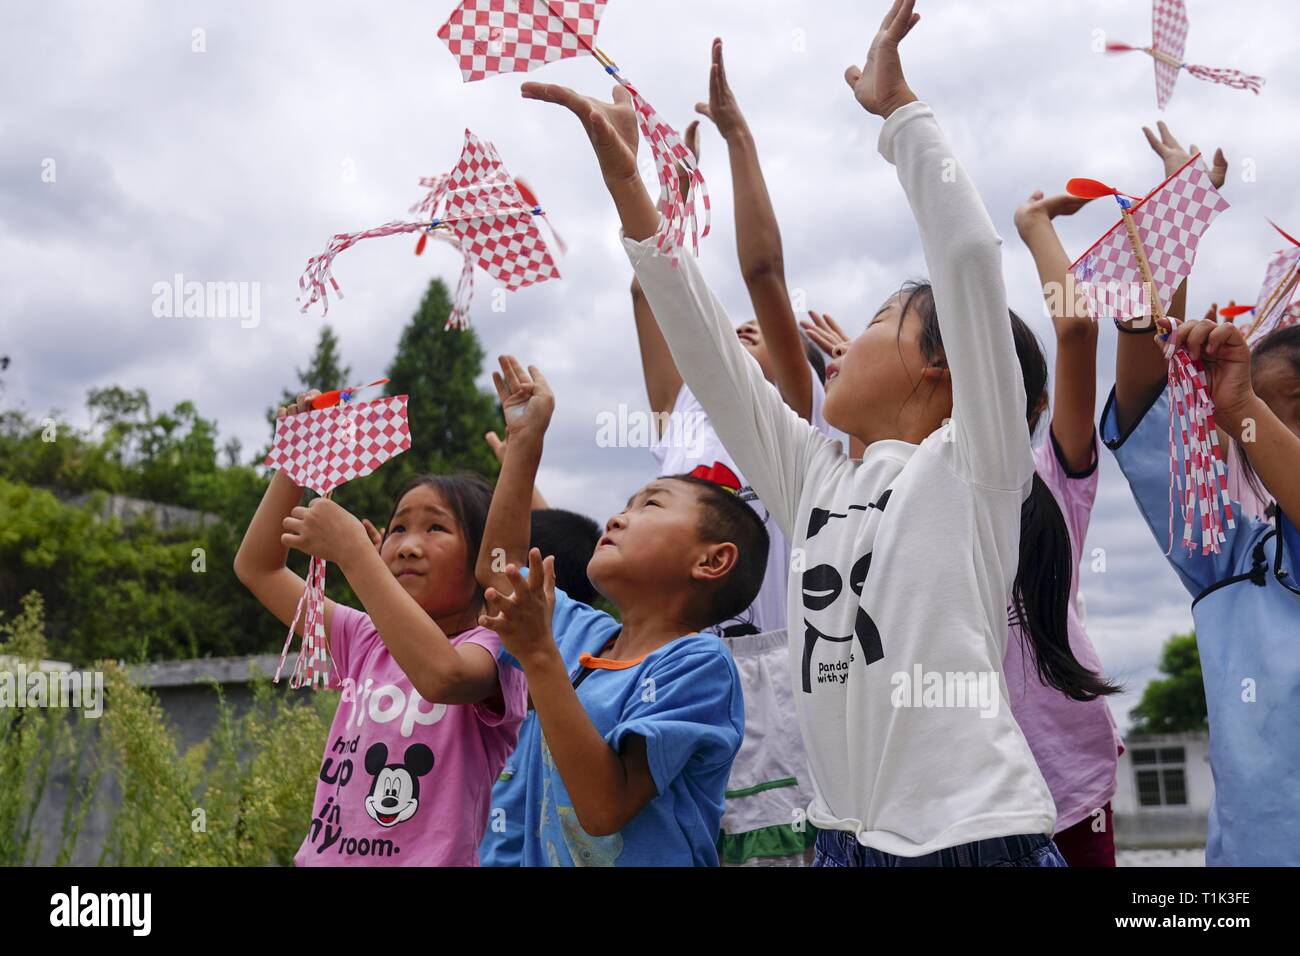 (190327) -- BEIJING, March 27, 2019 (Xinhua) -- Students conduct a test flight of aviation models at the primary school of Daba Village in Pengshui County, southwest China's Chongqing Municipality, Aug. 18, 2017. China's efforts to promote the 'balanced development' of compulsory education, which usually means narrowing inter-regional, rural-urban or inter-school gaps in terms of education conditions and quality, has borne fruit, the Ministry of Education said Tuesday.     According to the ministry, the balanced development of compulsory education has been achieved in 2,717 counties, represent Stock Photo